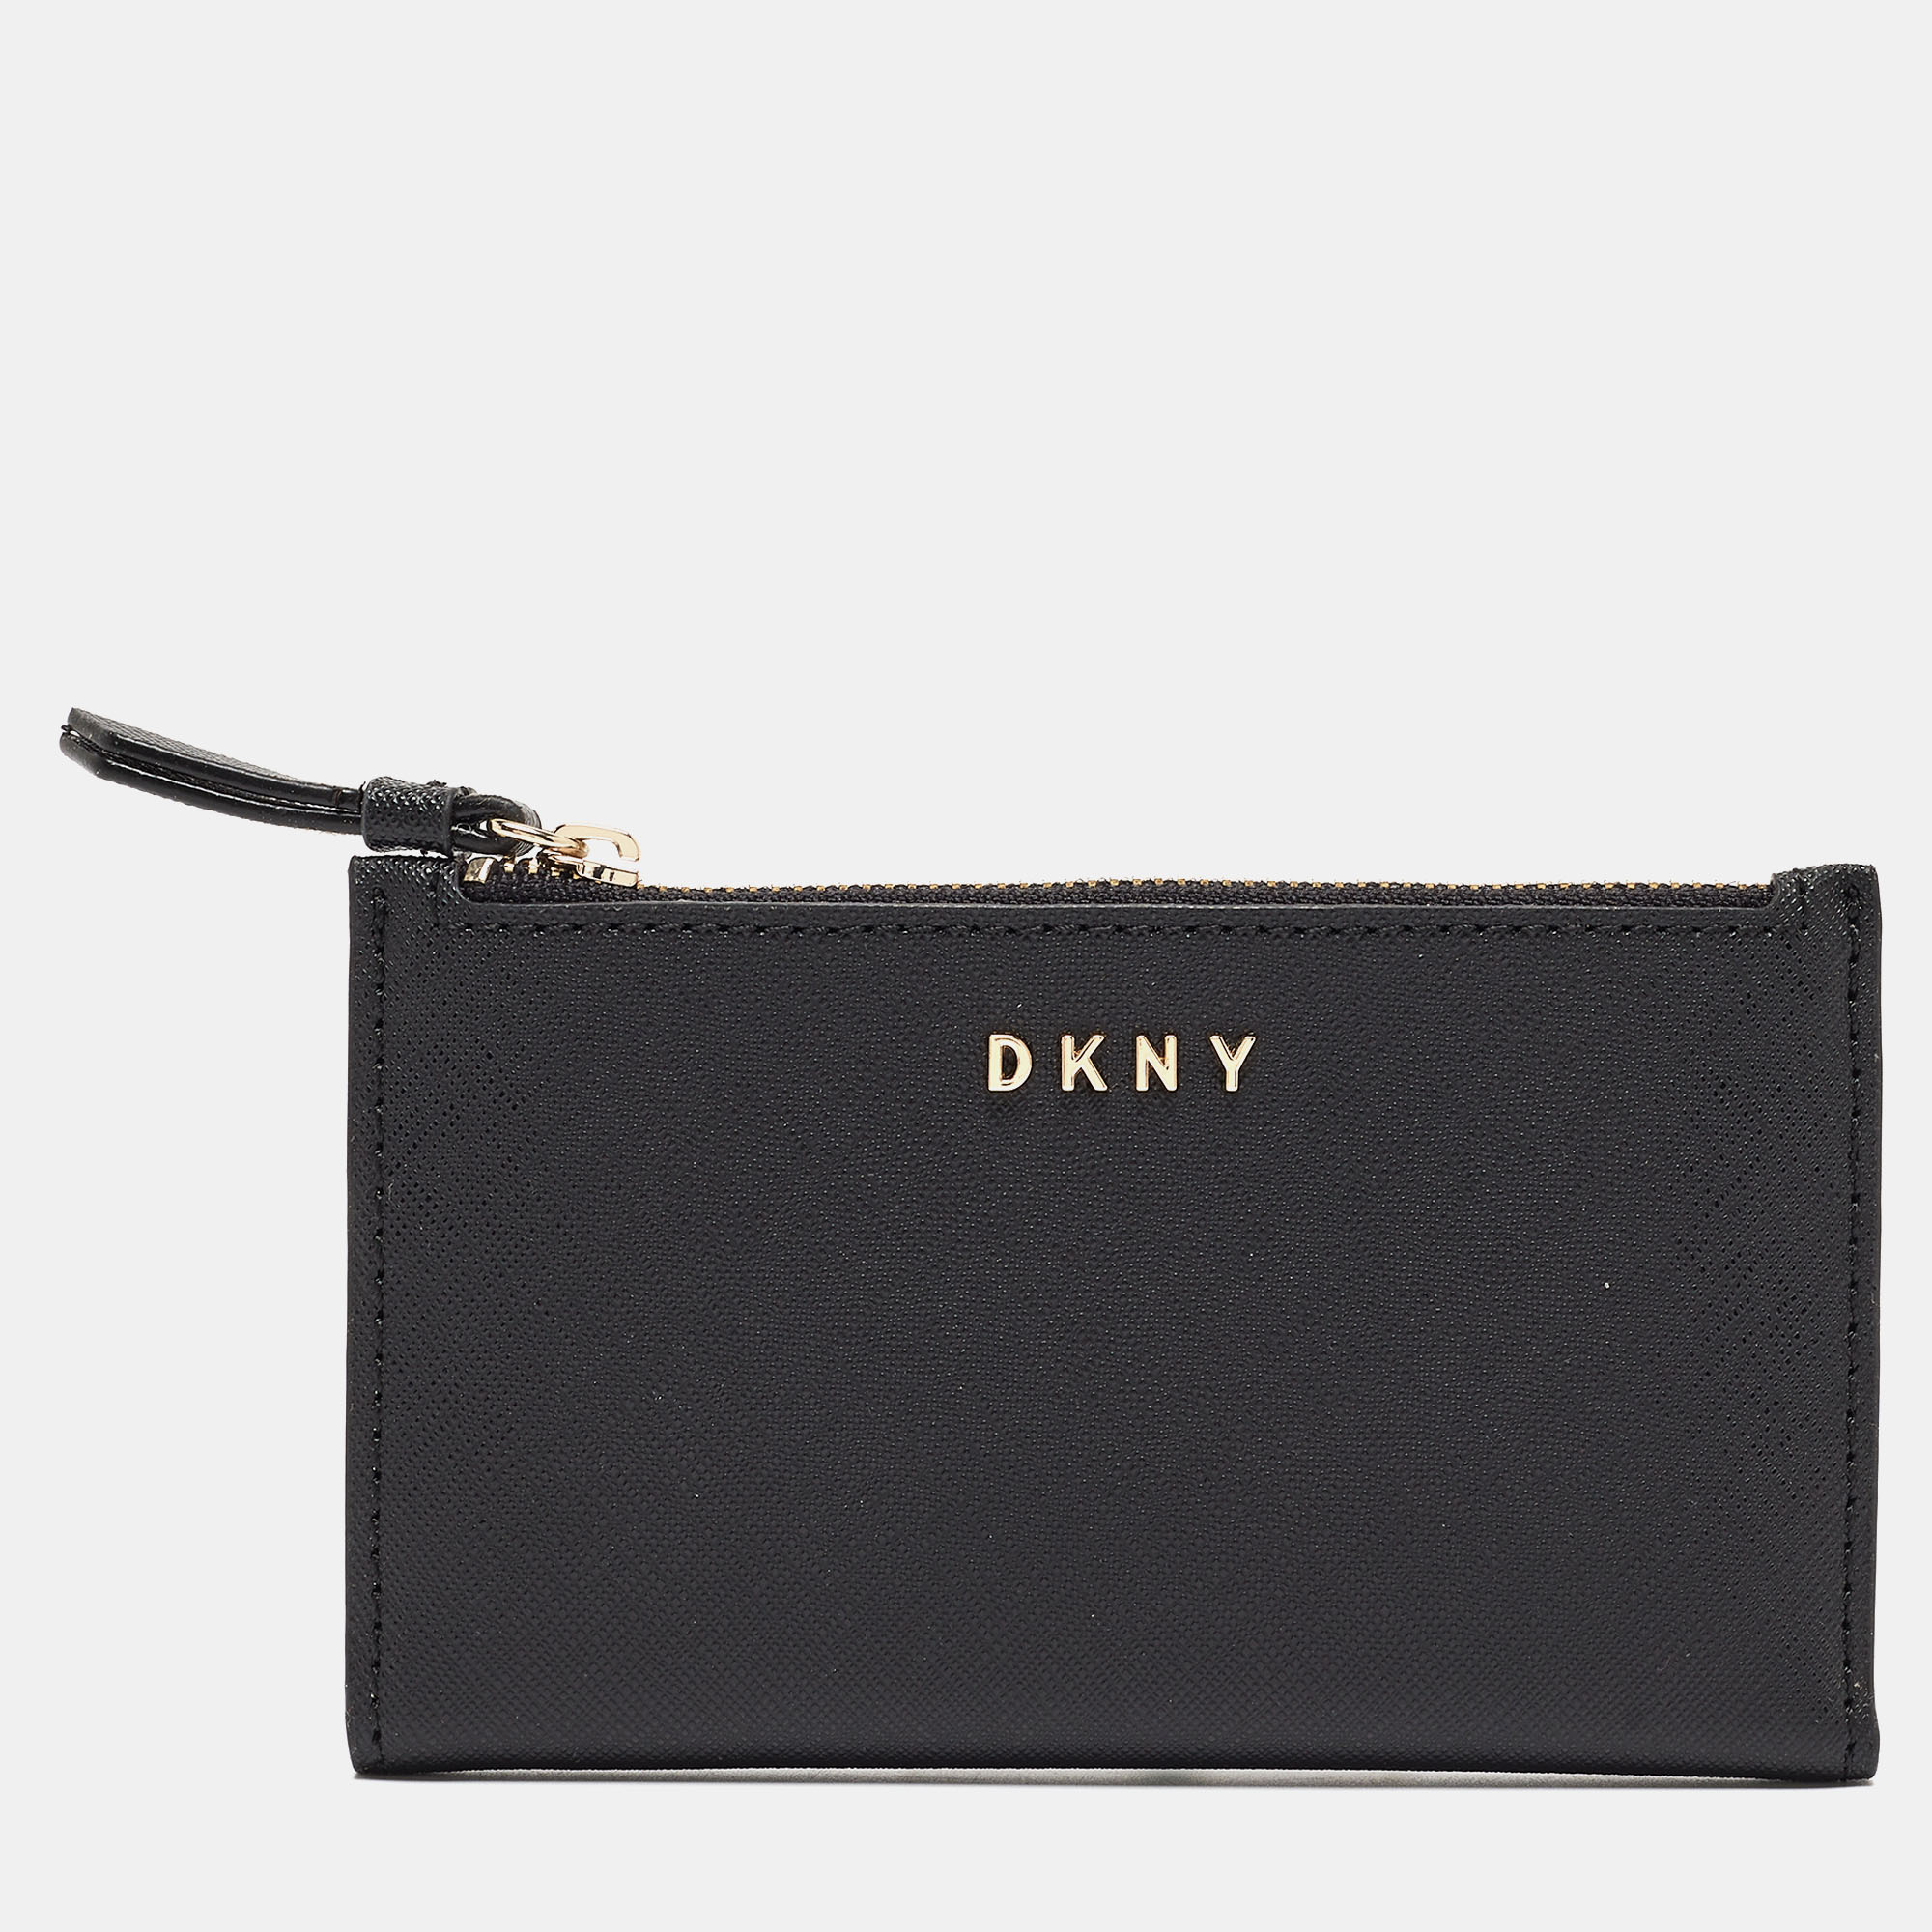 Pre-owned Dkny Black Leather Bryant Park Compact Wallet